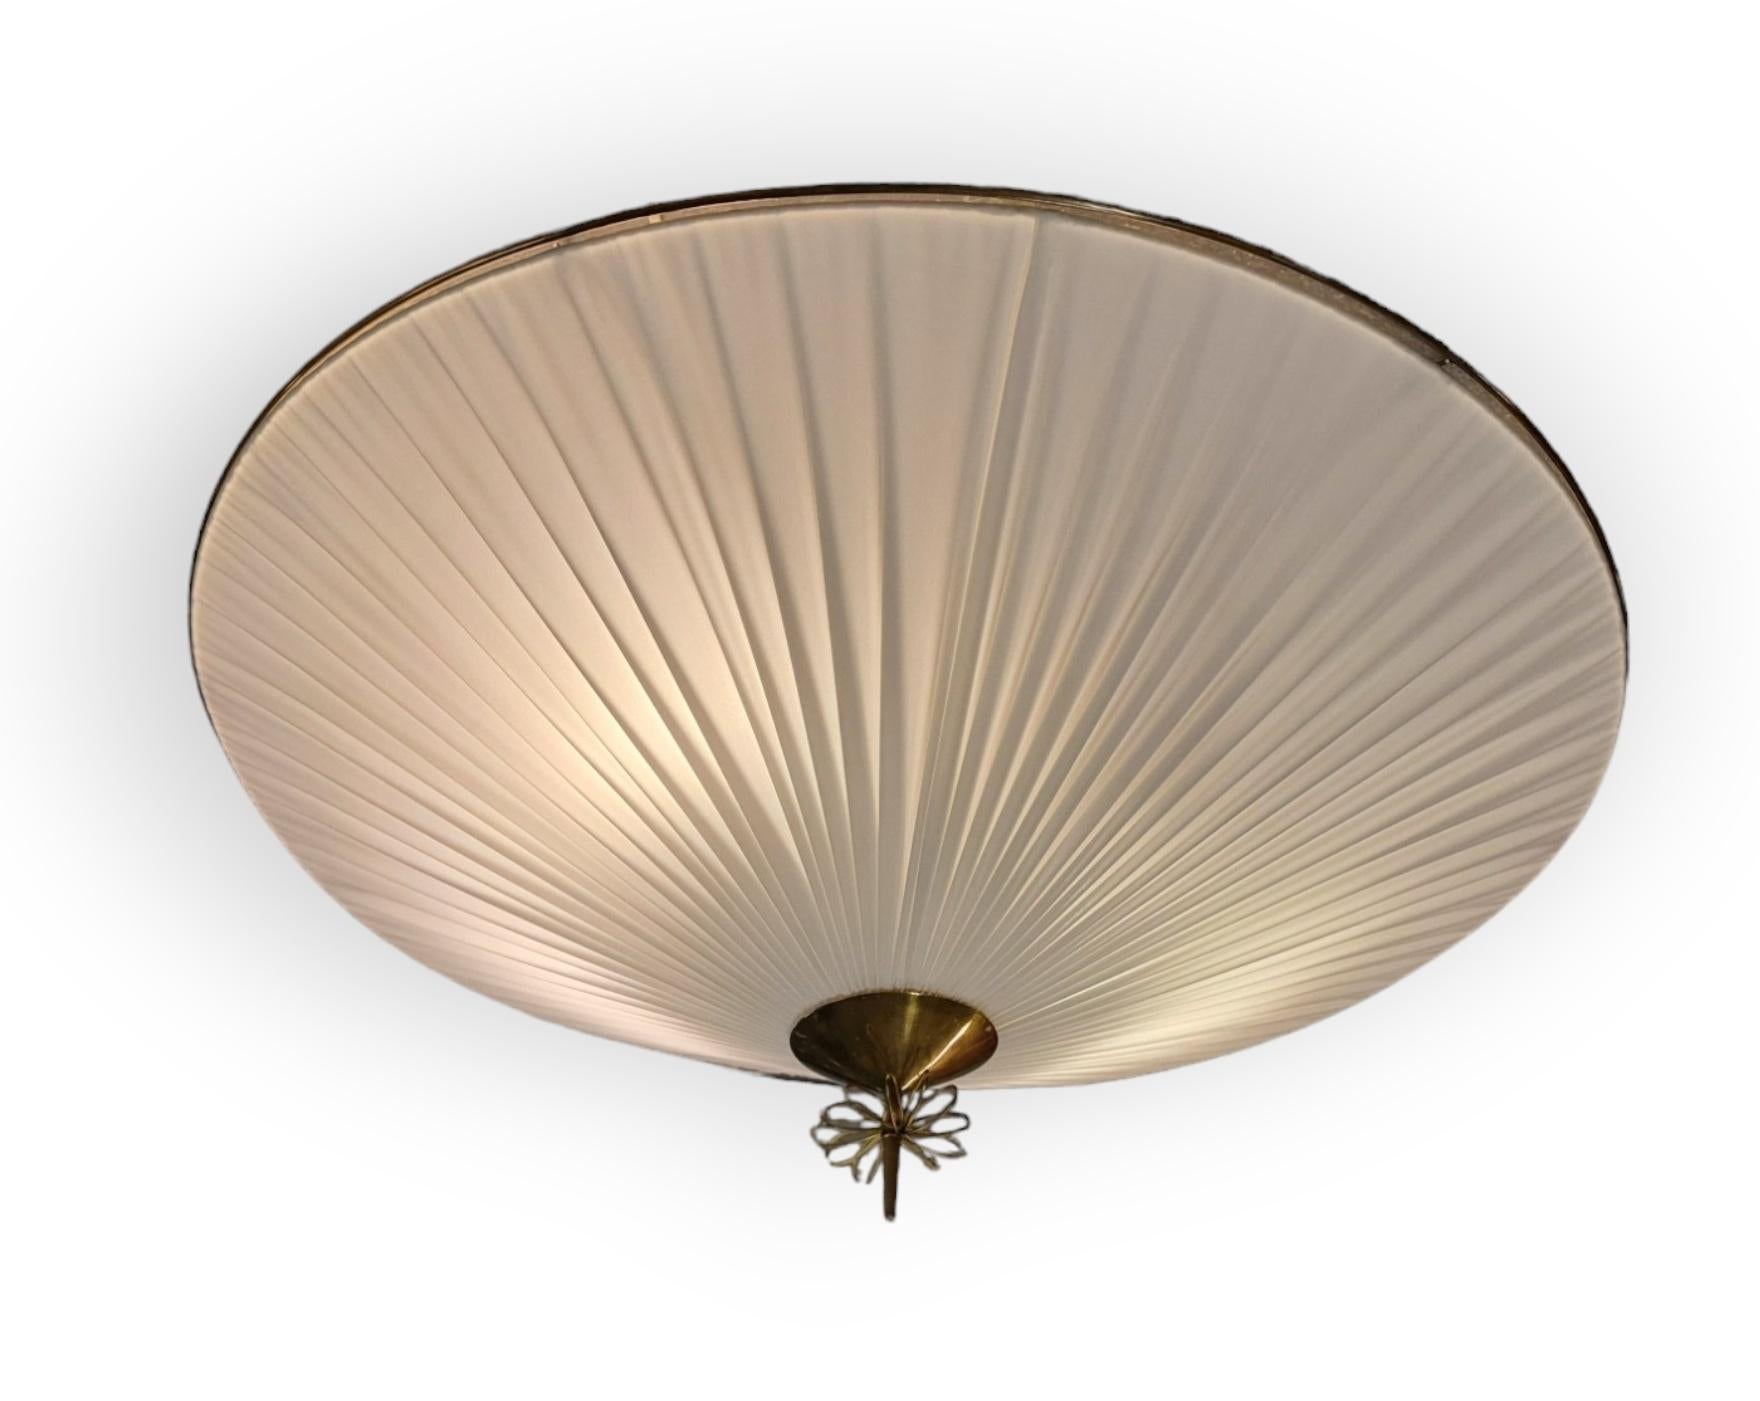 Monumental Paavo Tynell Commissioned Flush Mount in Brass and Fabric, Taito Oy For Sale 11